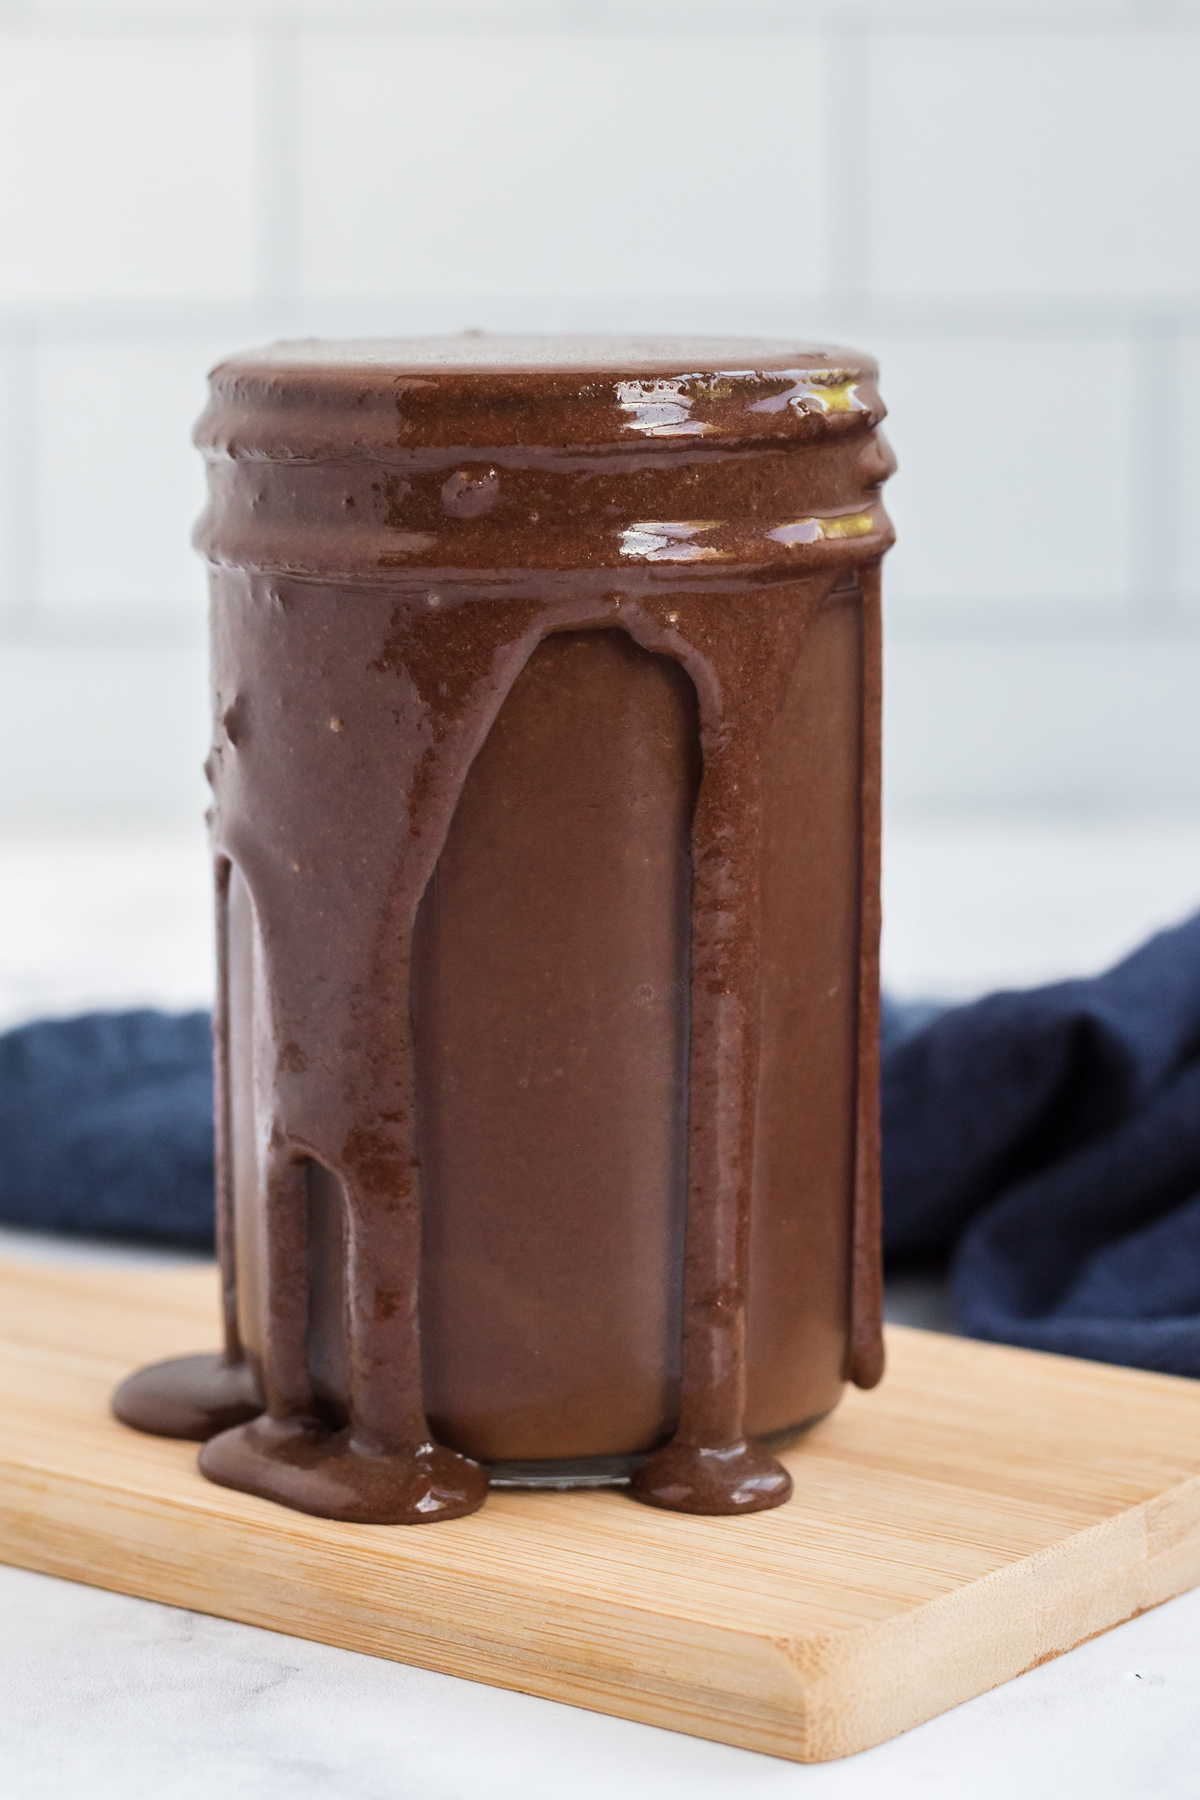 Hot fudge sauce on a jar with a wooden board and a linen in background